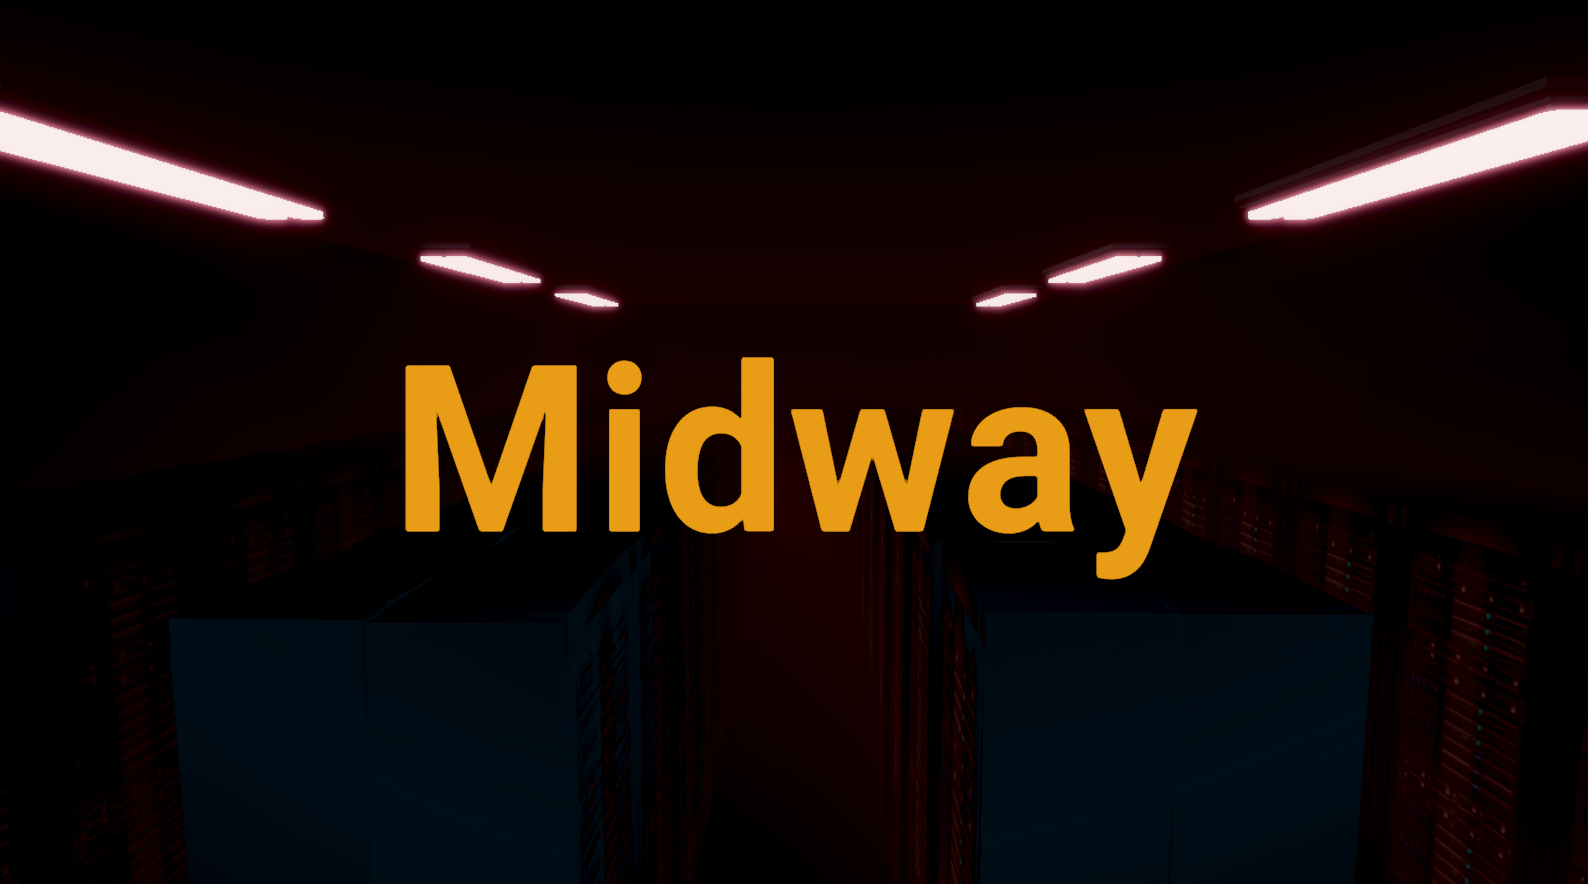 Midway (Release!)